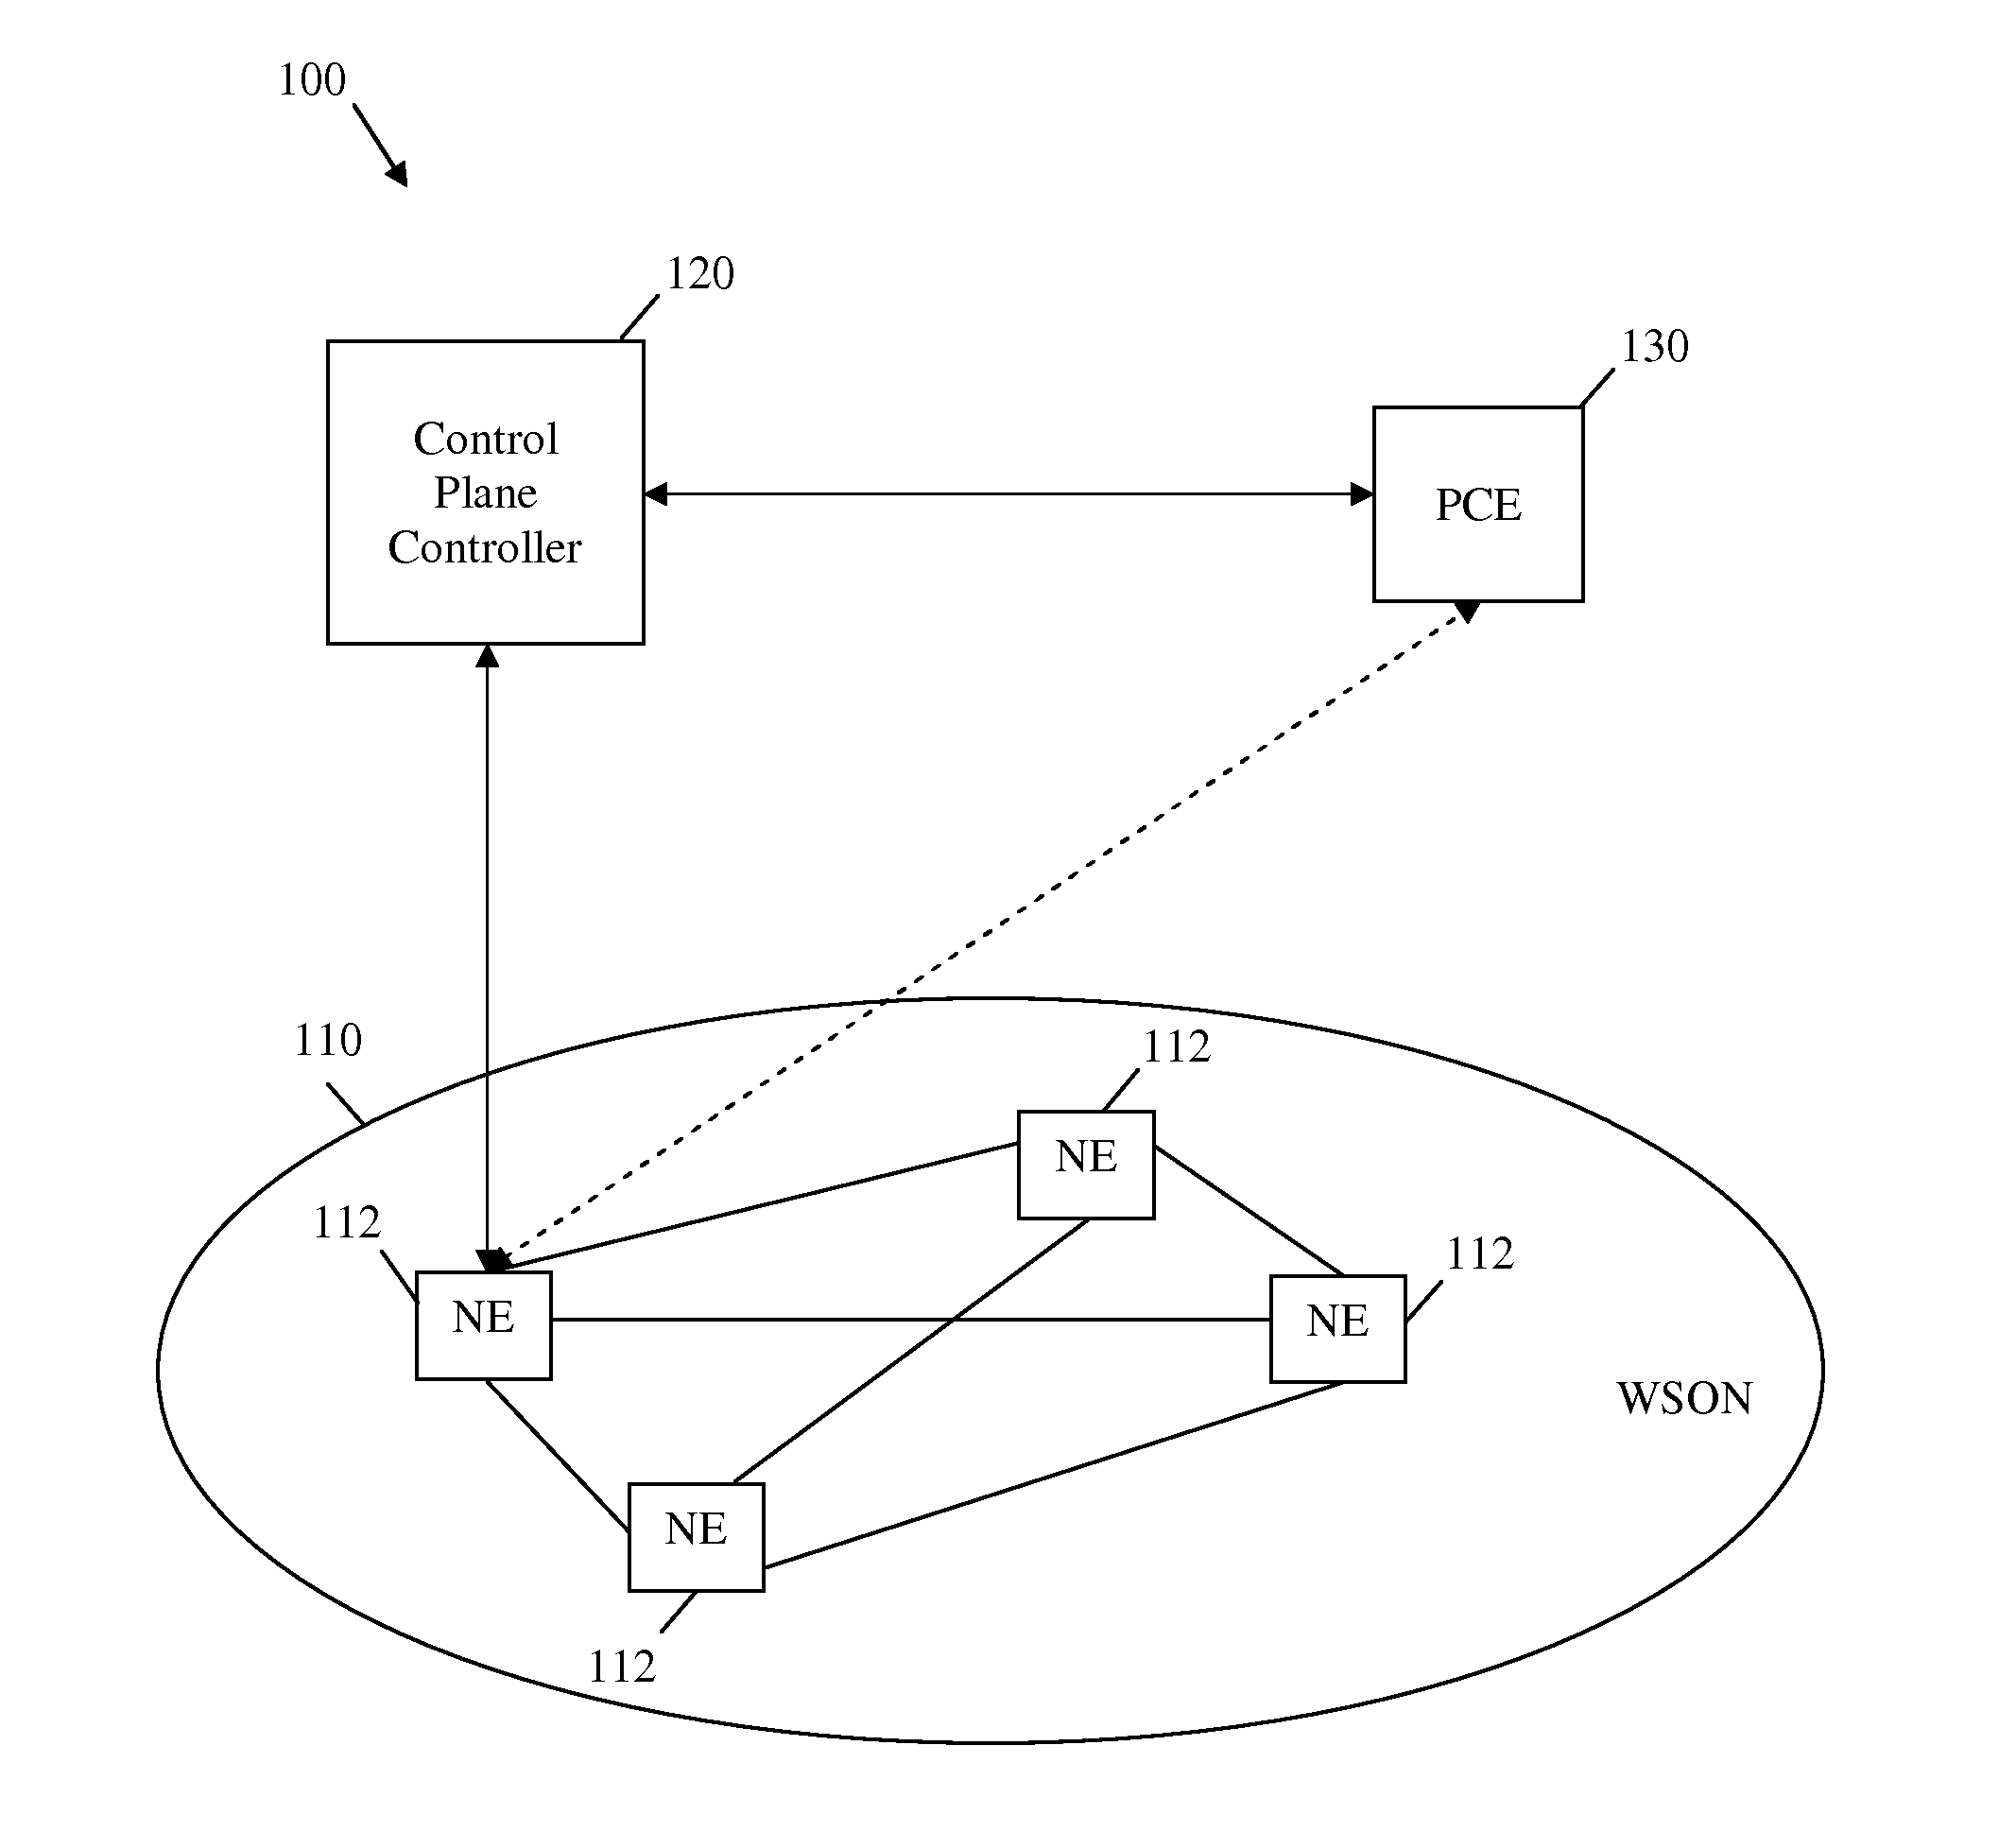 Method for Characterizing Wavelength Switched Optical Network Signal Characteristics and Network Element compatibility Constraints for Generalized Multi-Protocol Label Switching